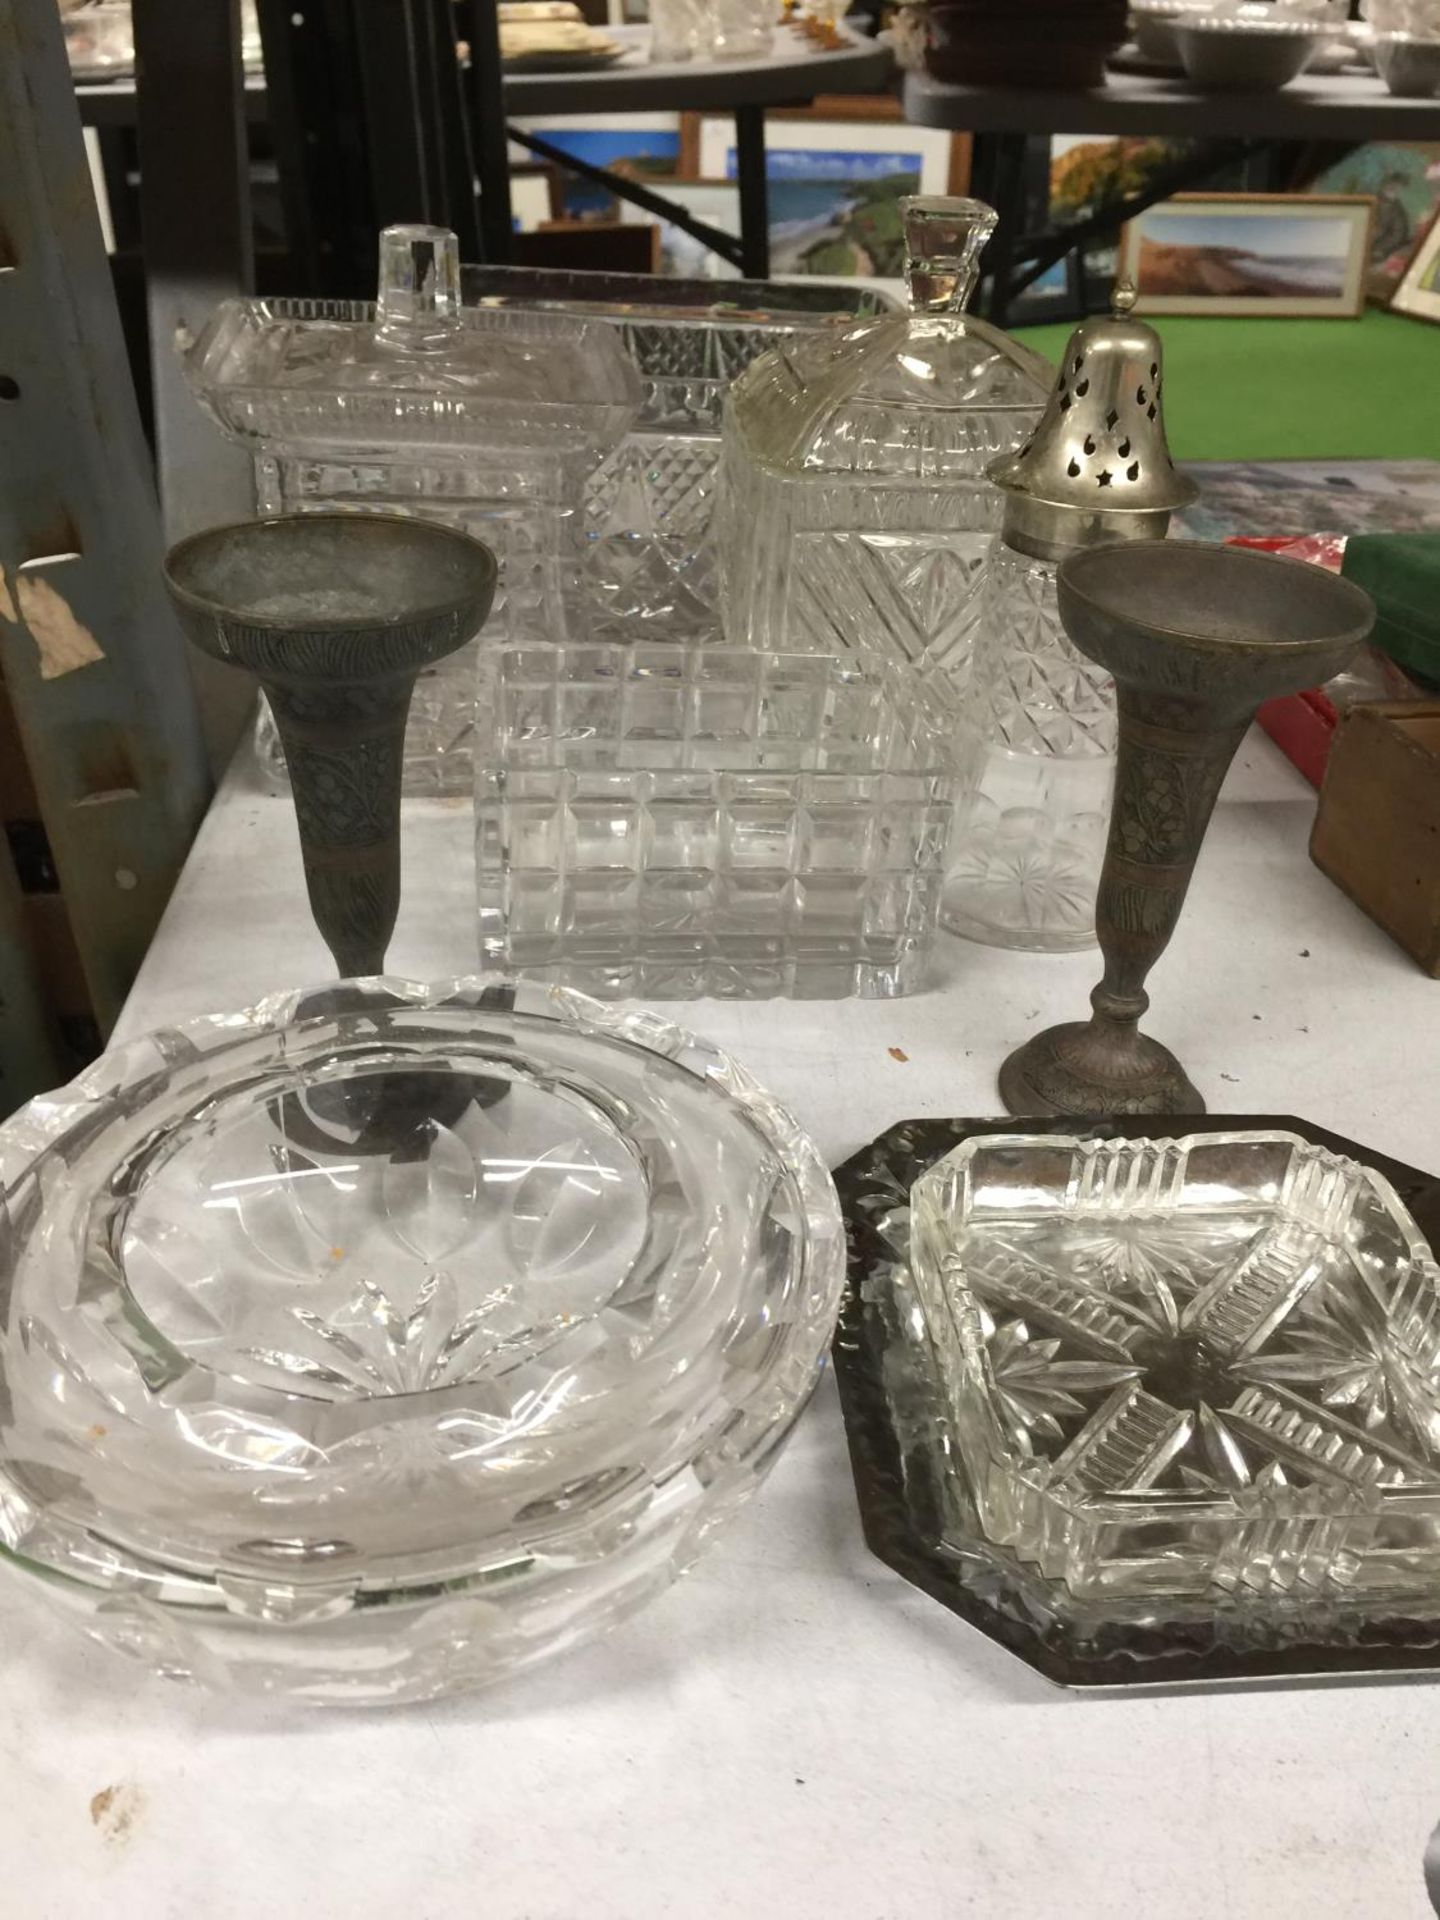 A QUANTITY OF GLASSWARE INCLUDING LIDDED BOWLS, DISHES, CANDLESTICKS, SUGAR SIFTER, ETC - Image 3 of 3